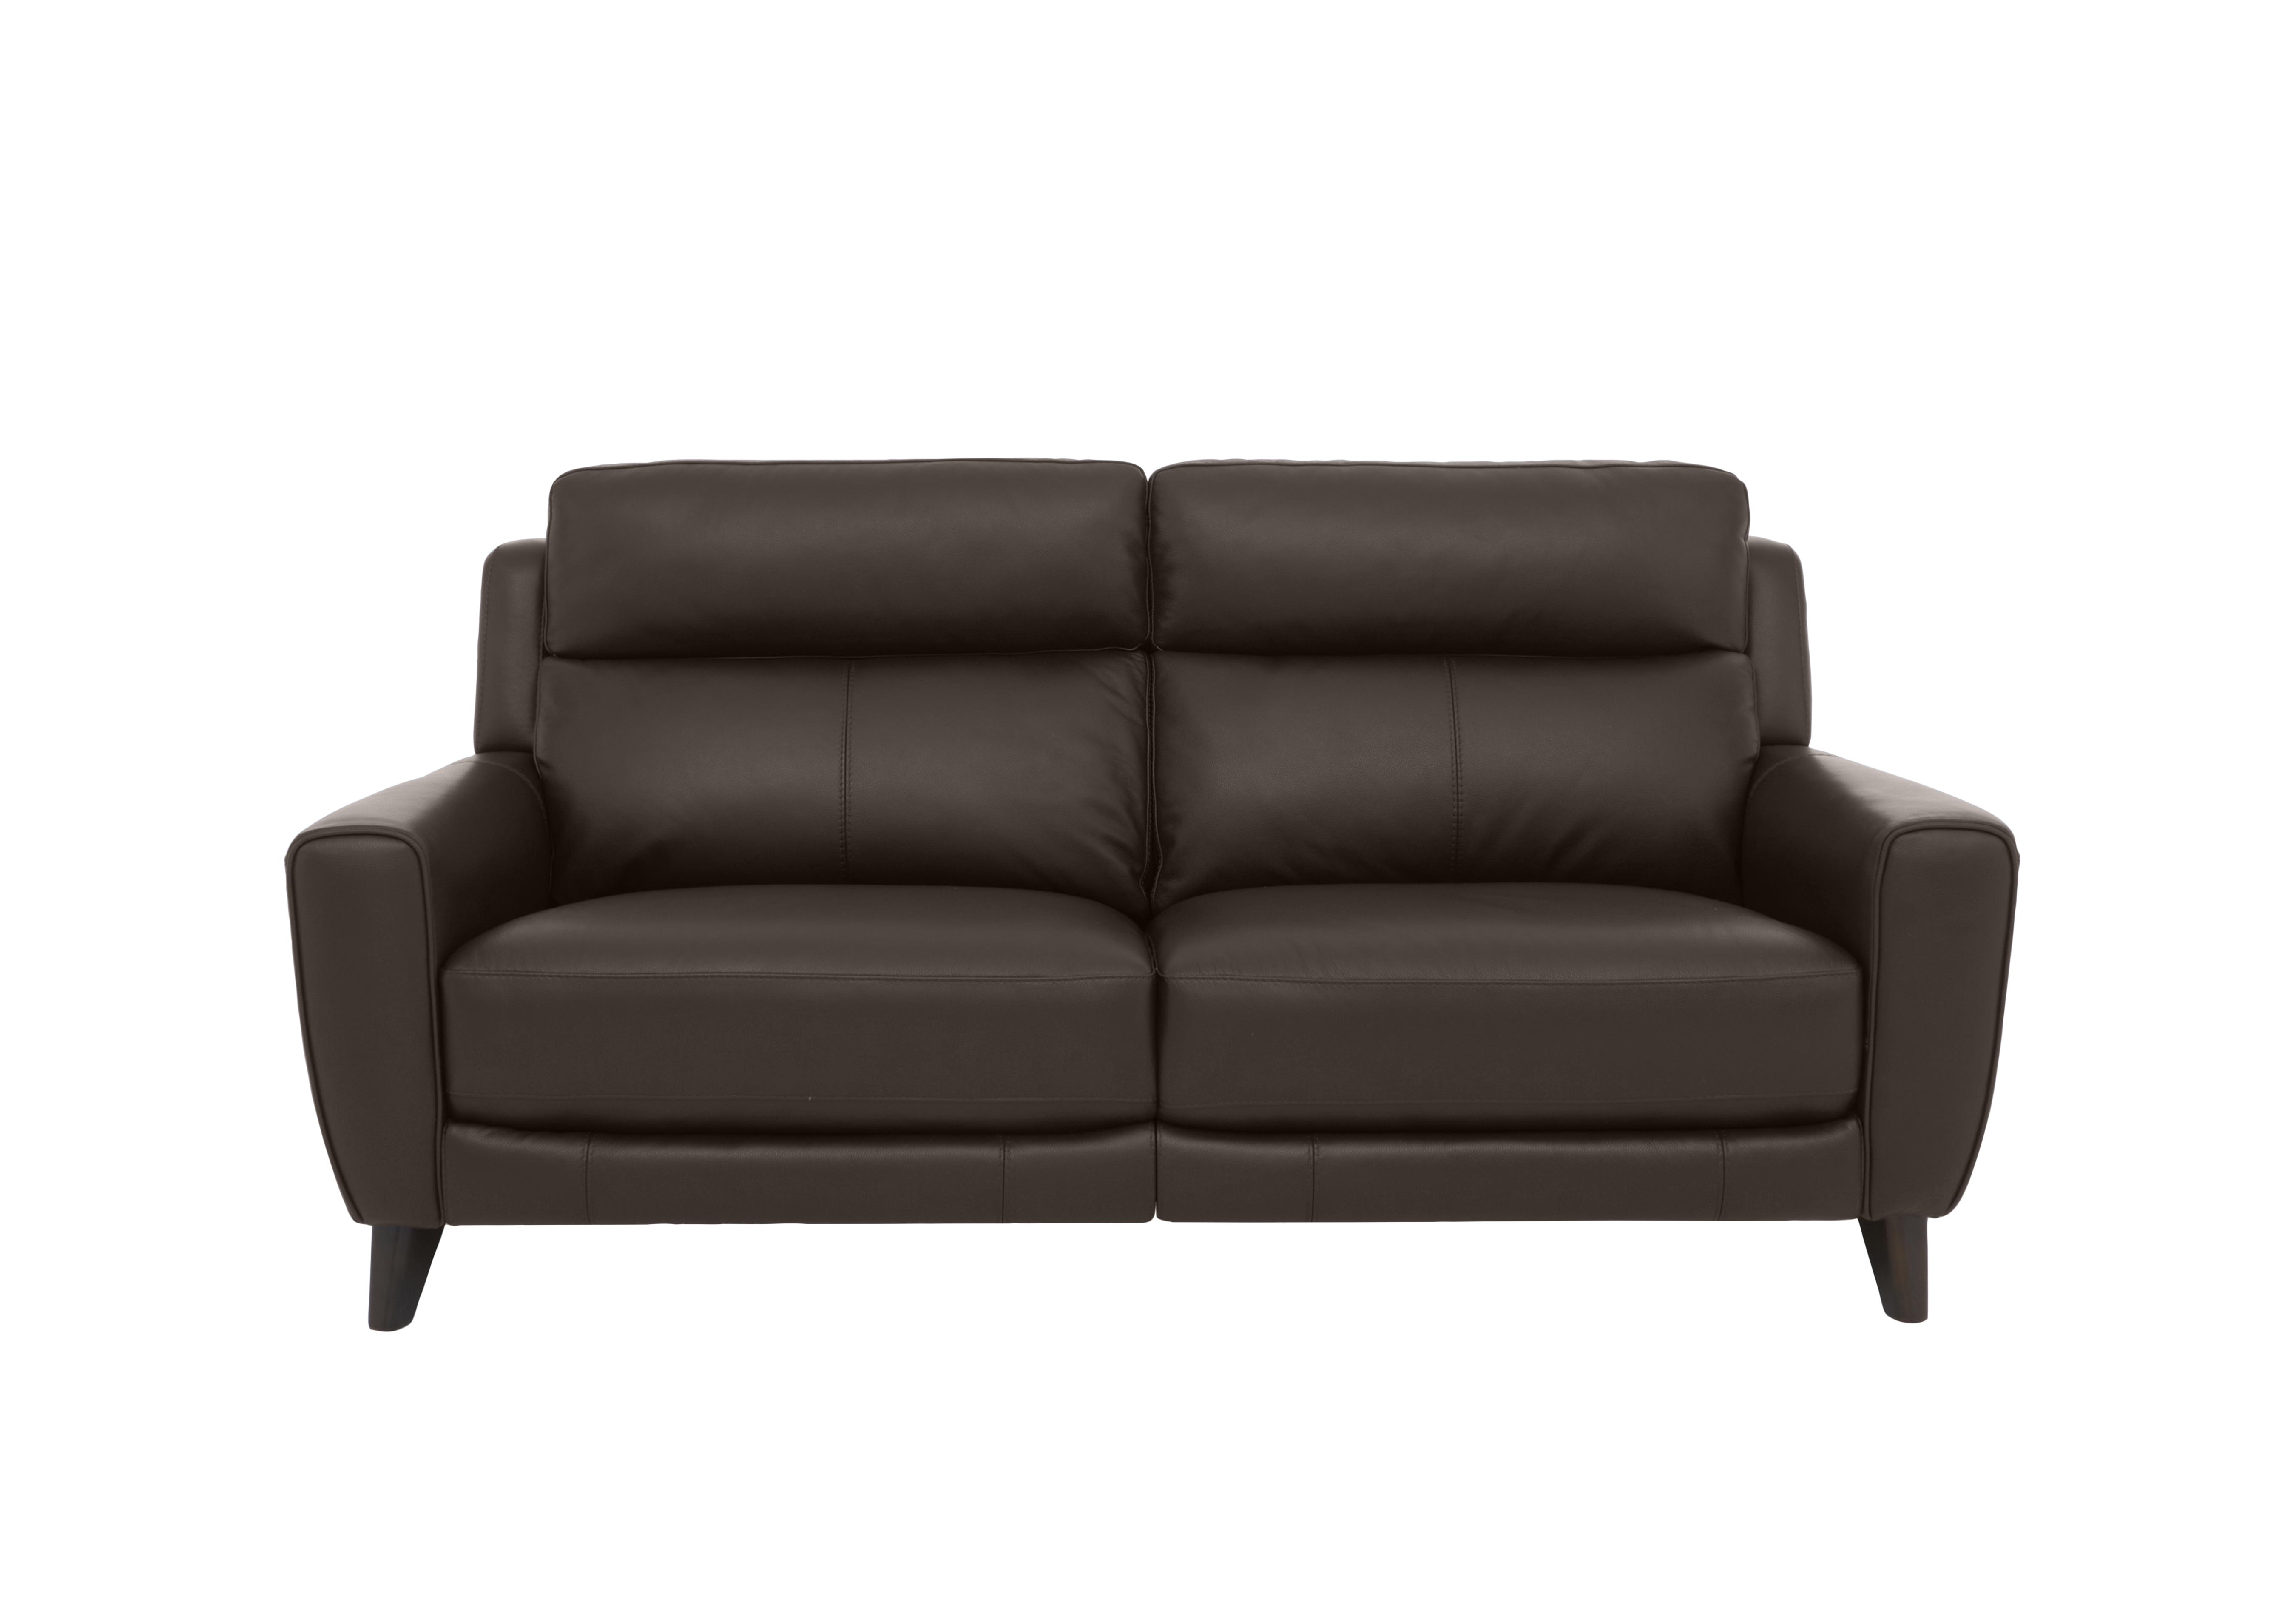 Zen 3 Seater Leather Power Recliner Sofa with Power Headrests and Power Lumbar in Bx-037c Walnut on Furniture Village